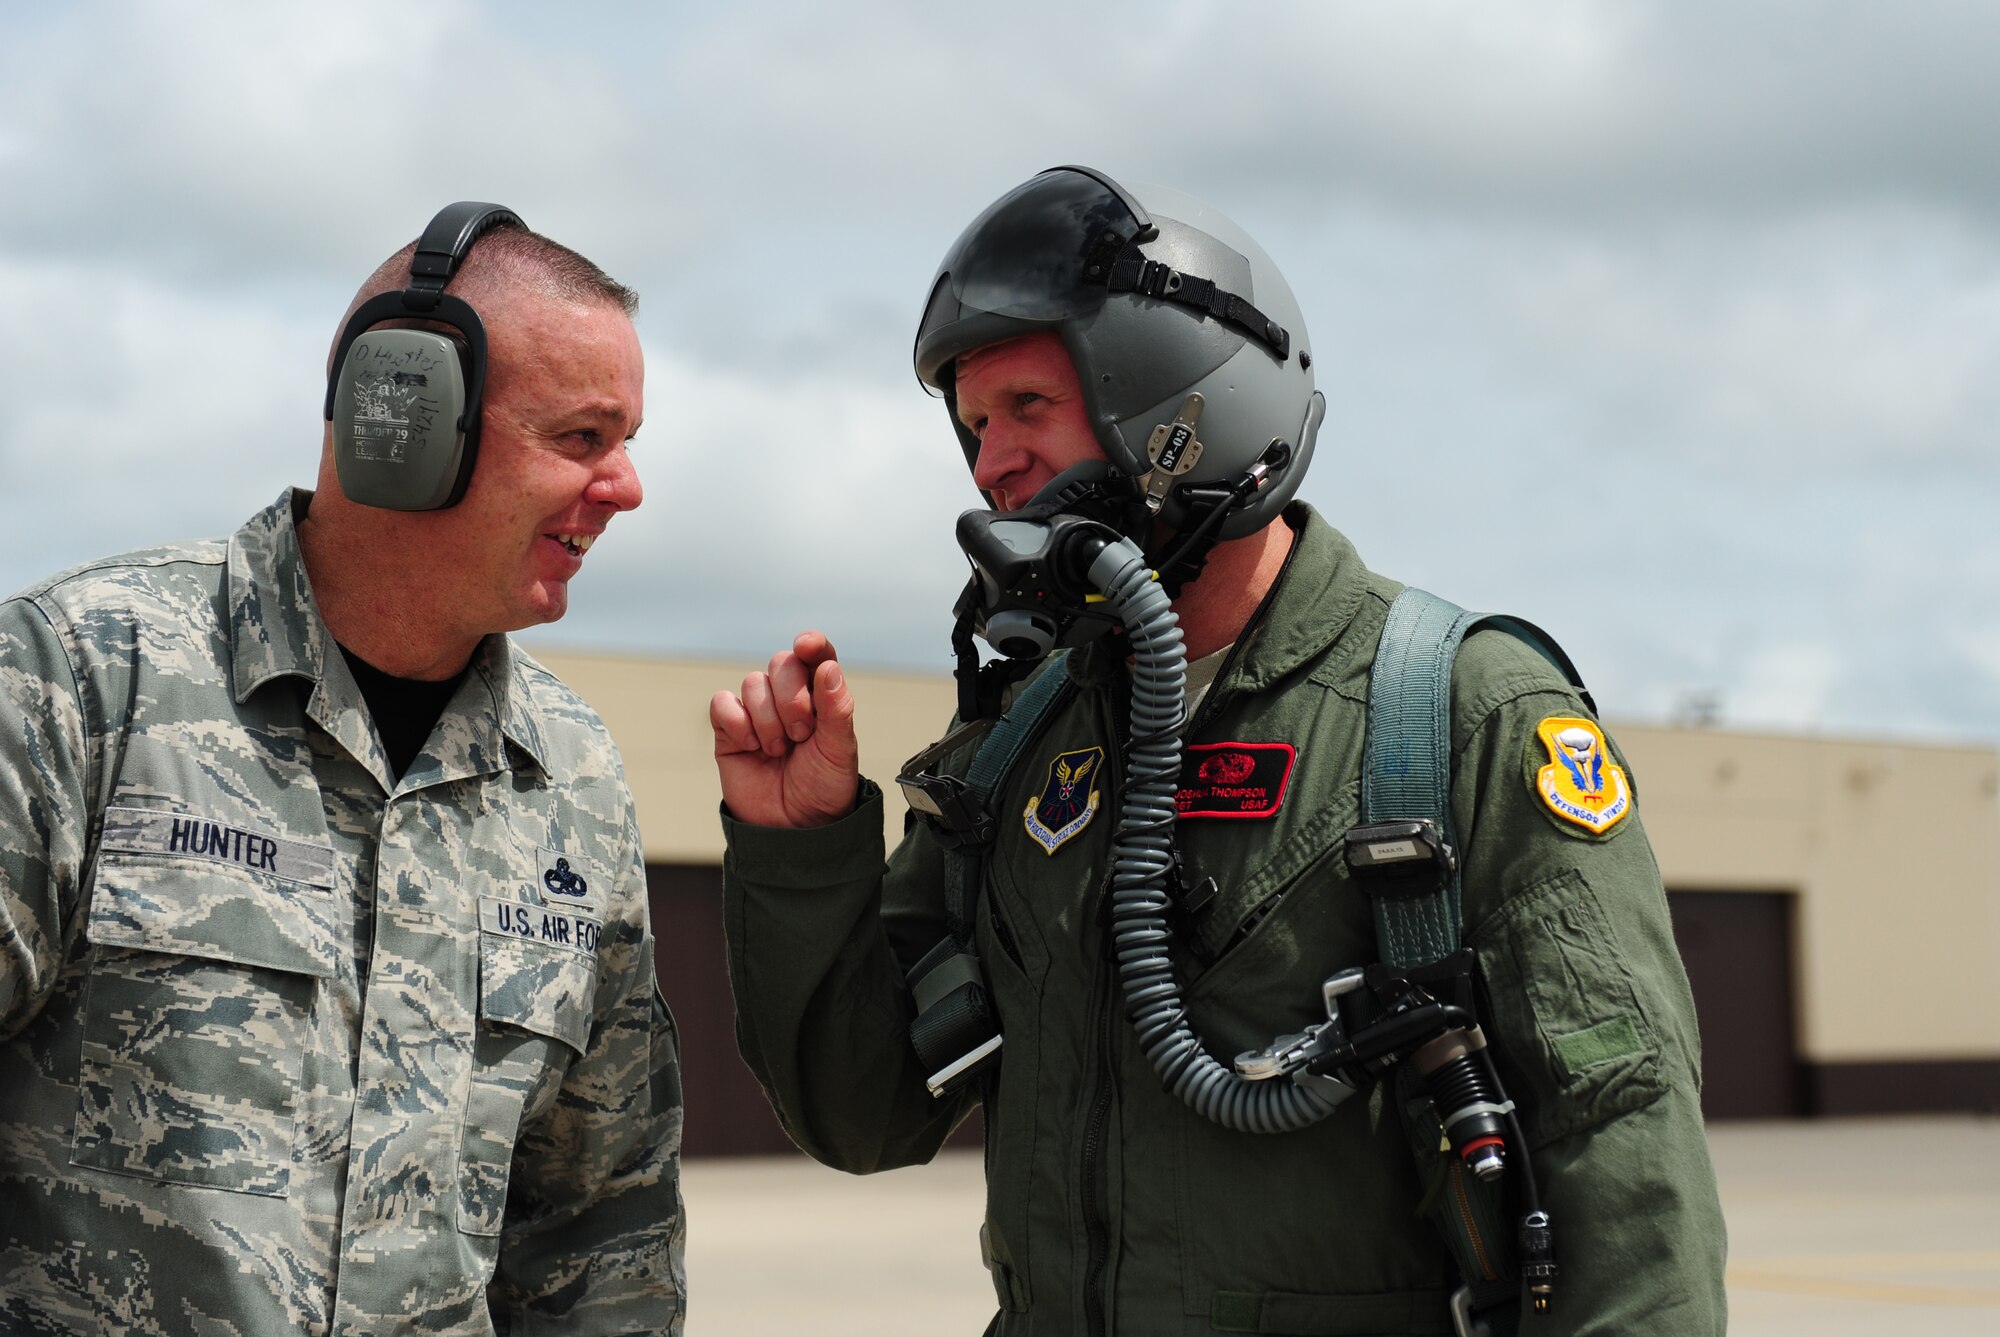 Chief Master Sgt. Darron Hunter and Air Force Staff Sgt. Joshua Thompson, 509th Aircraft Maintenance Squadron, share some words following a B-2 Spirit incentive flight at Whiteman Air Force Base, Mo., July 10, 2015. Thompson was awarded the incentive flight for being named the 2012 509th Maintenance Group Crew Chief of the Year. Two other Crew Chiefs of the Year were also given incentive flights the same day. (U.S. Air Force photo by Senior Airman Joel Pfiester/Released)